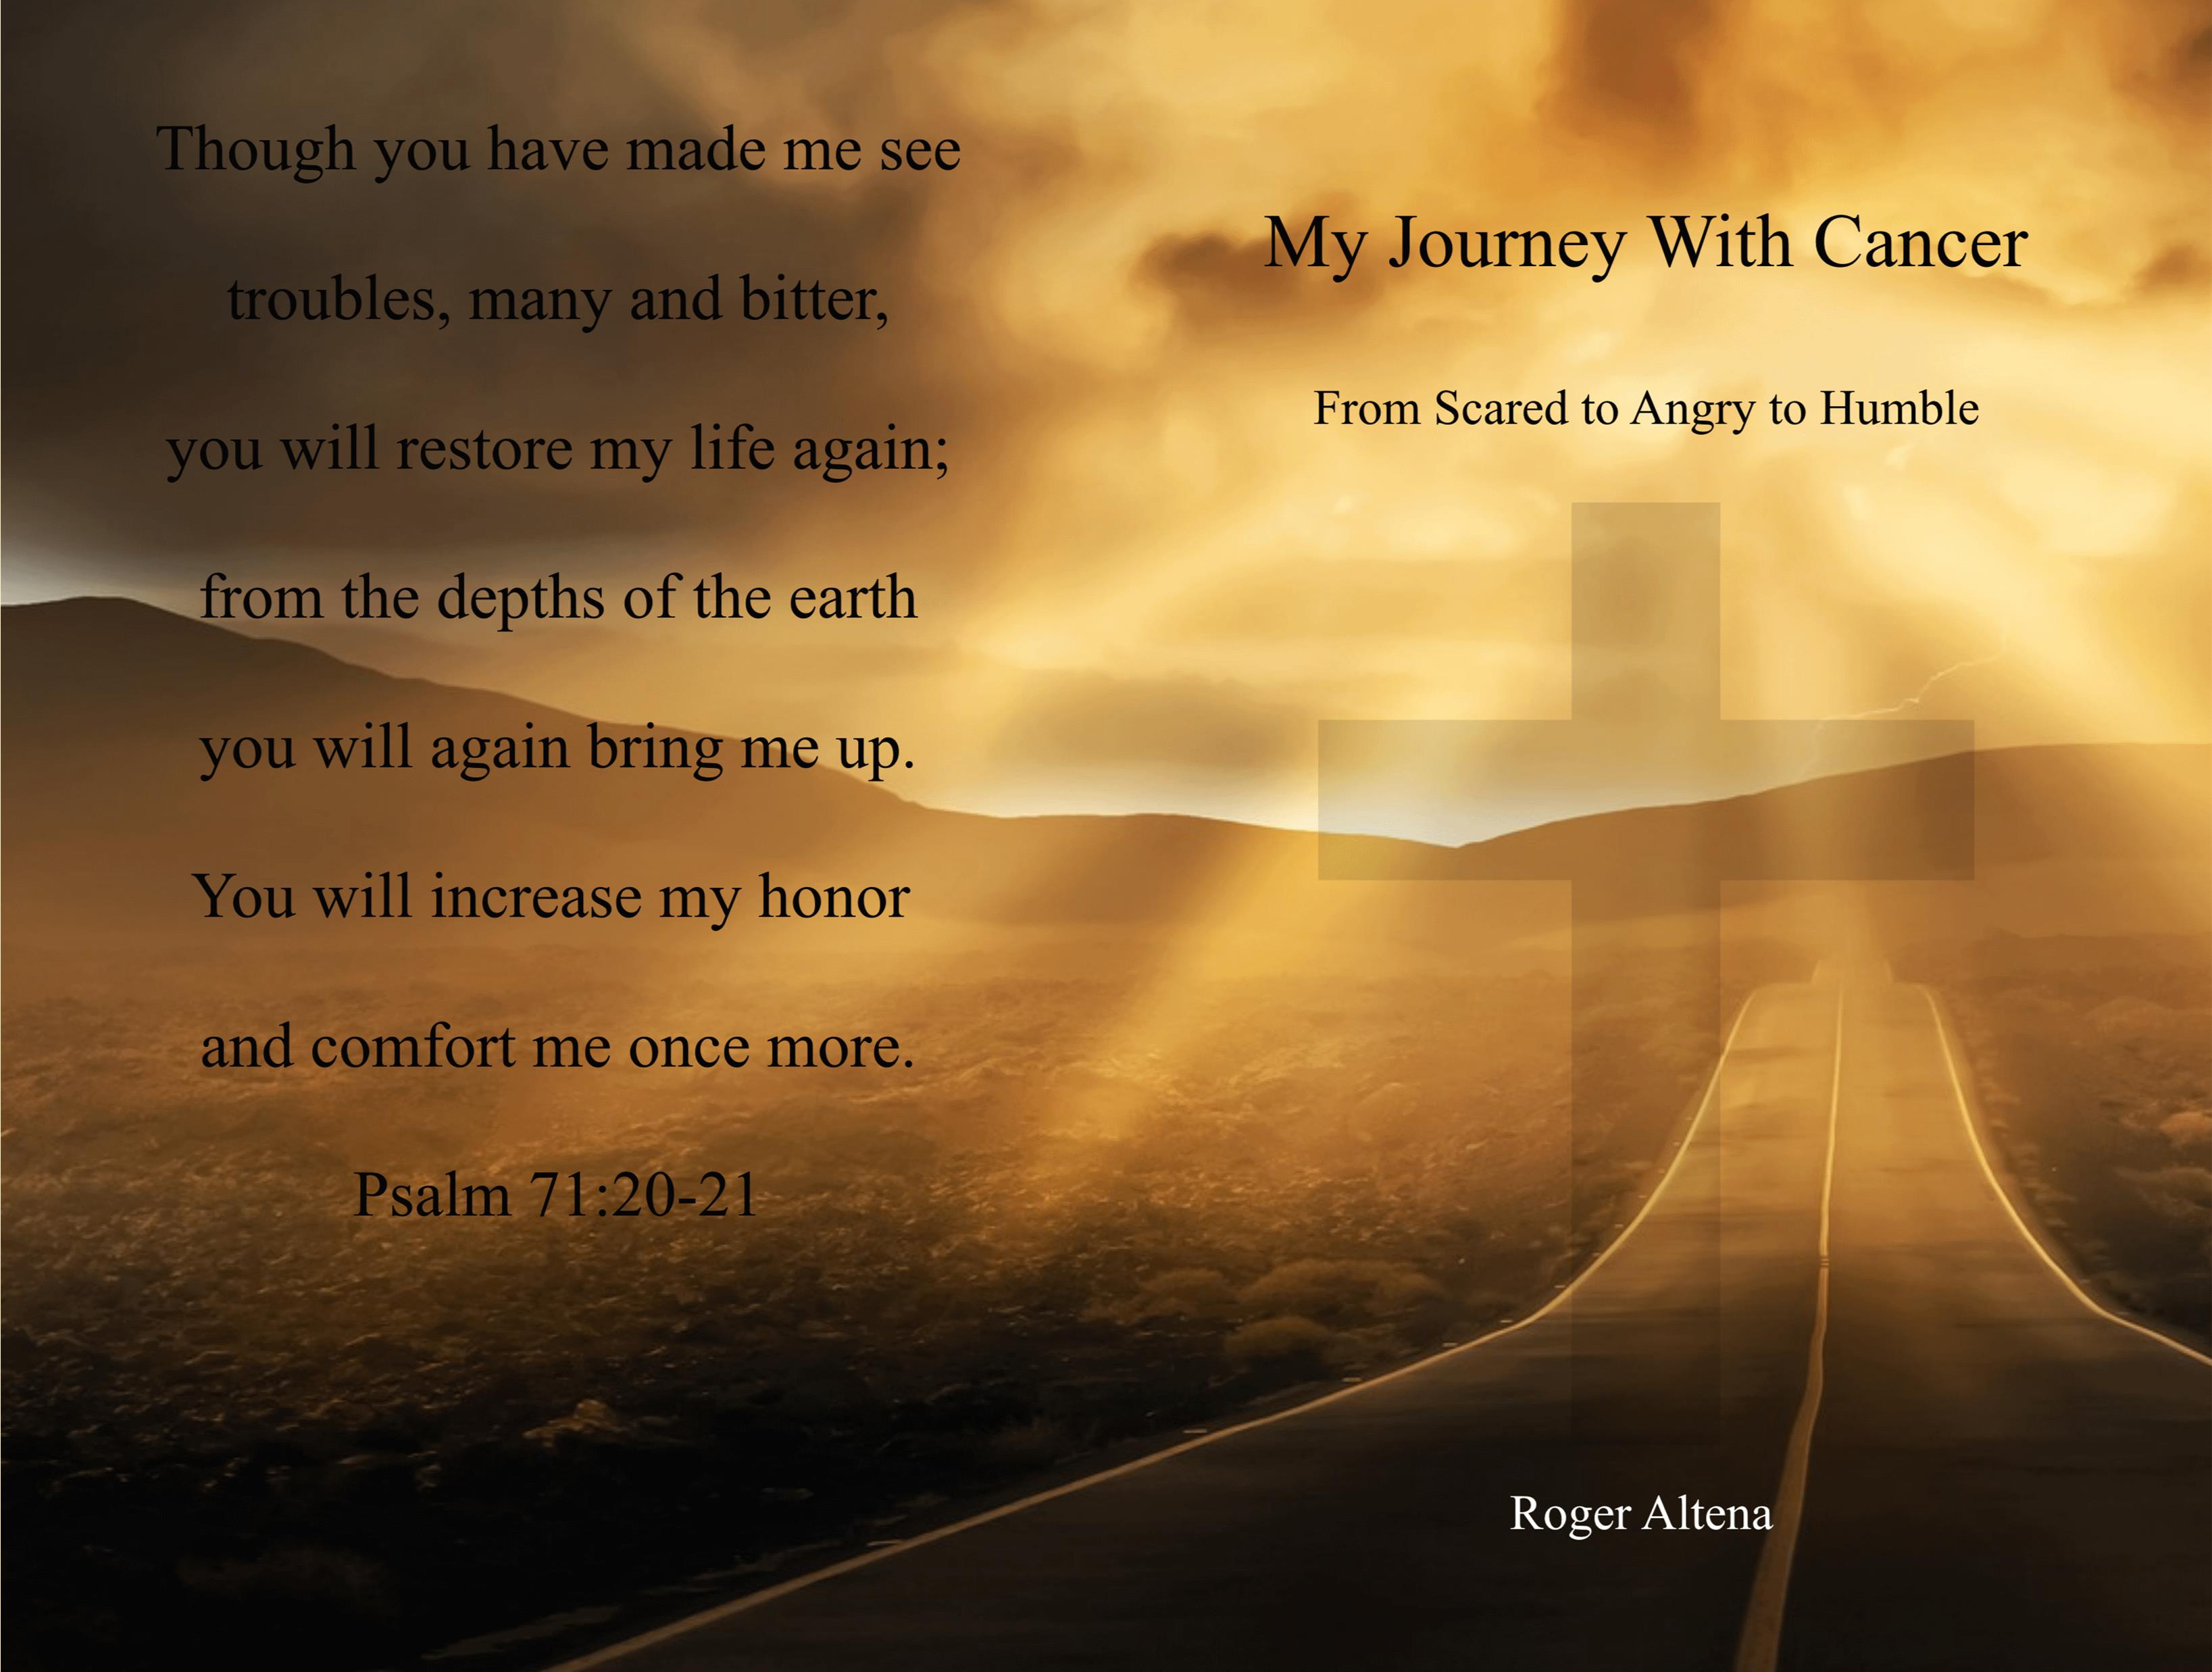 My Journey With Cancer cover image